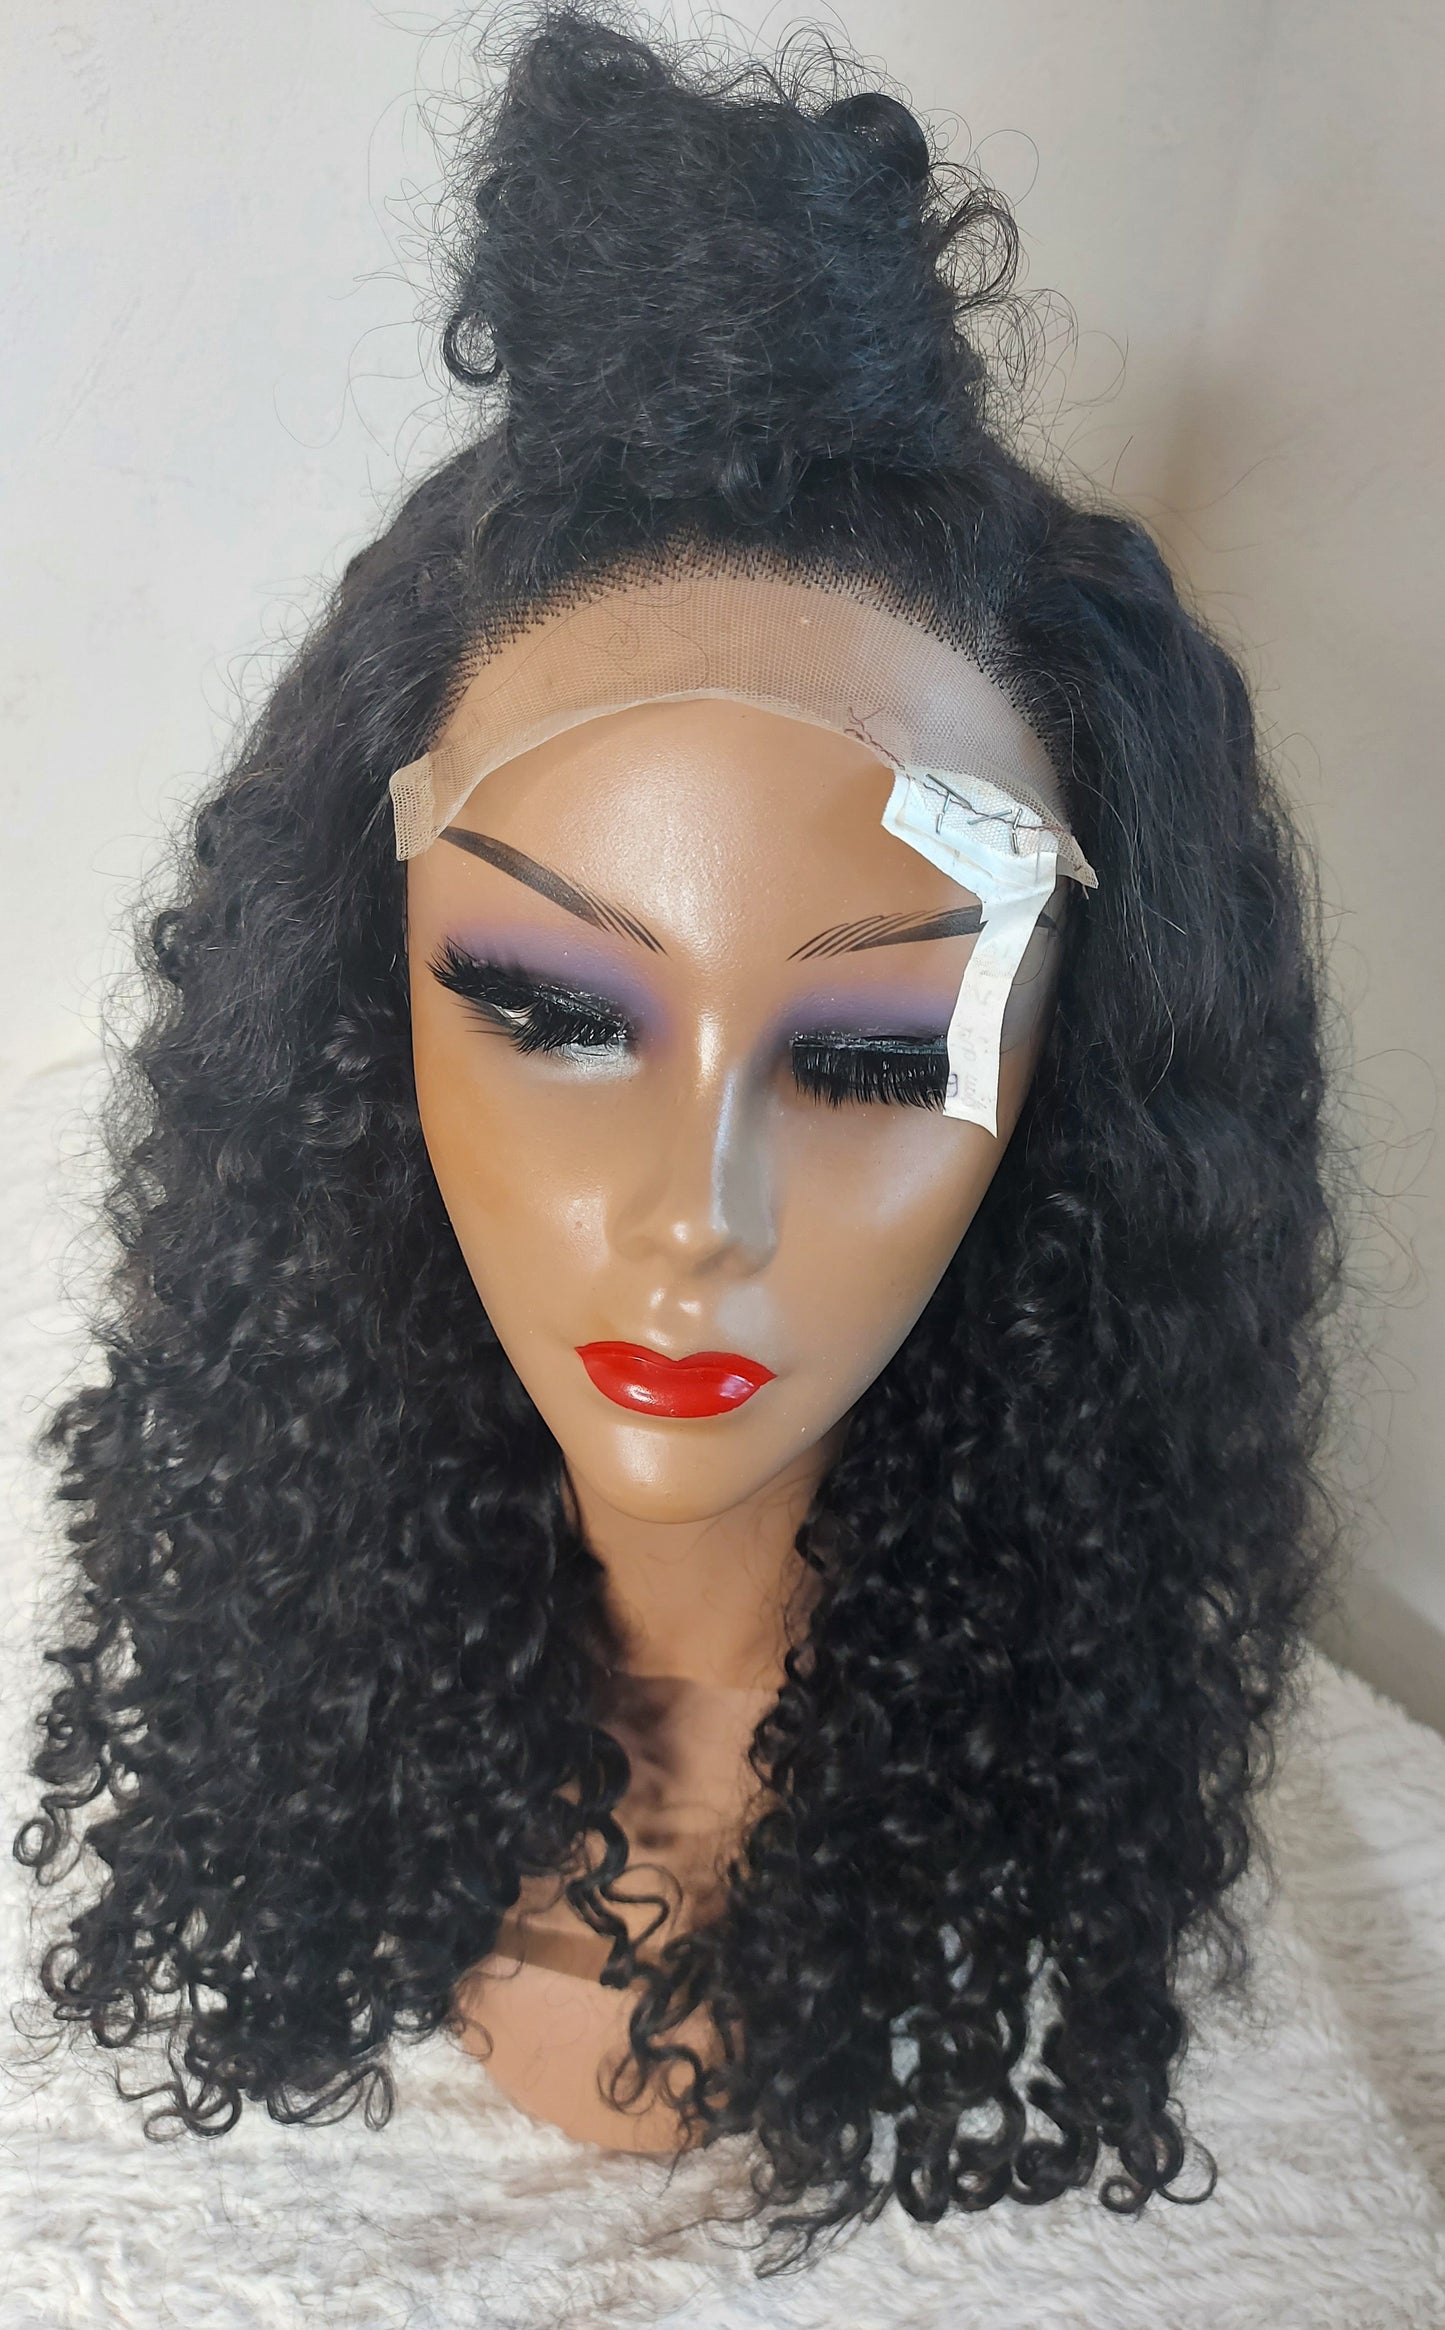 Jerry Curl Human Hair   Wig